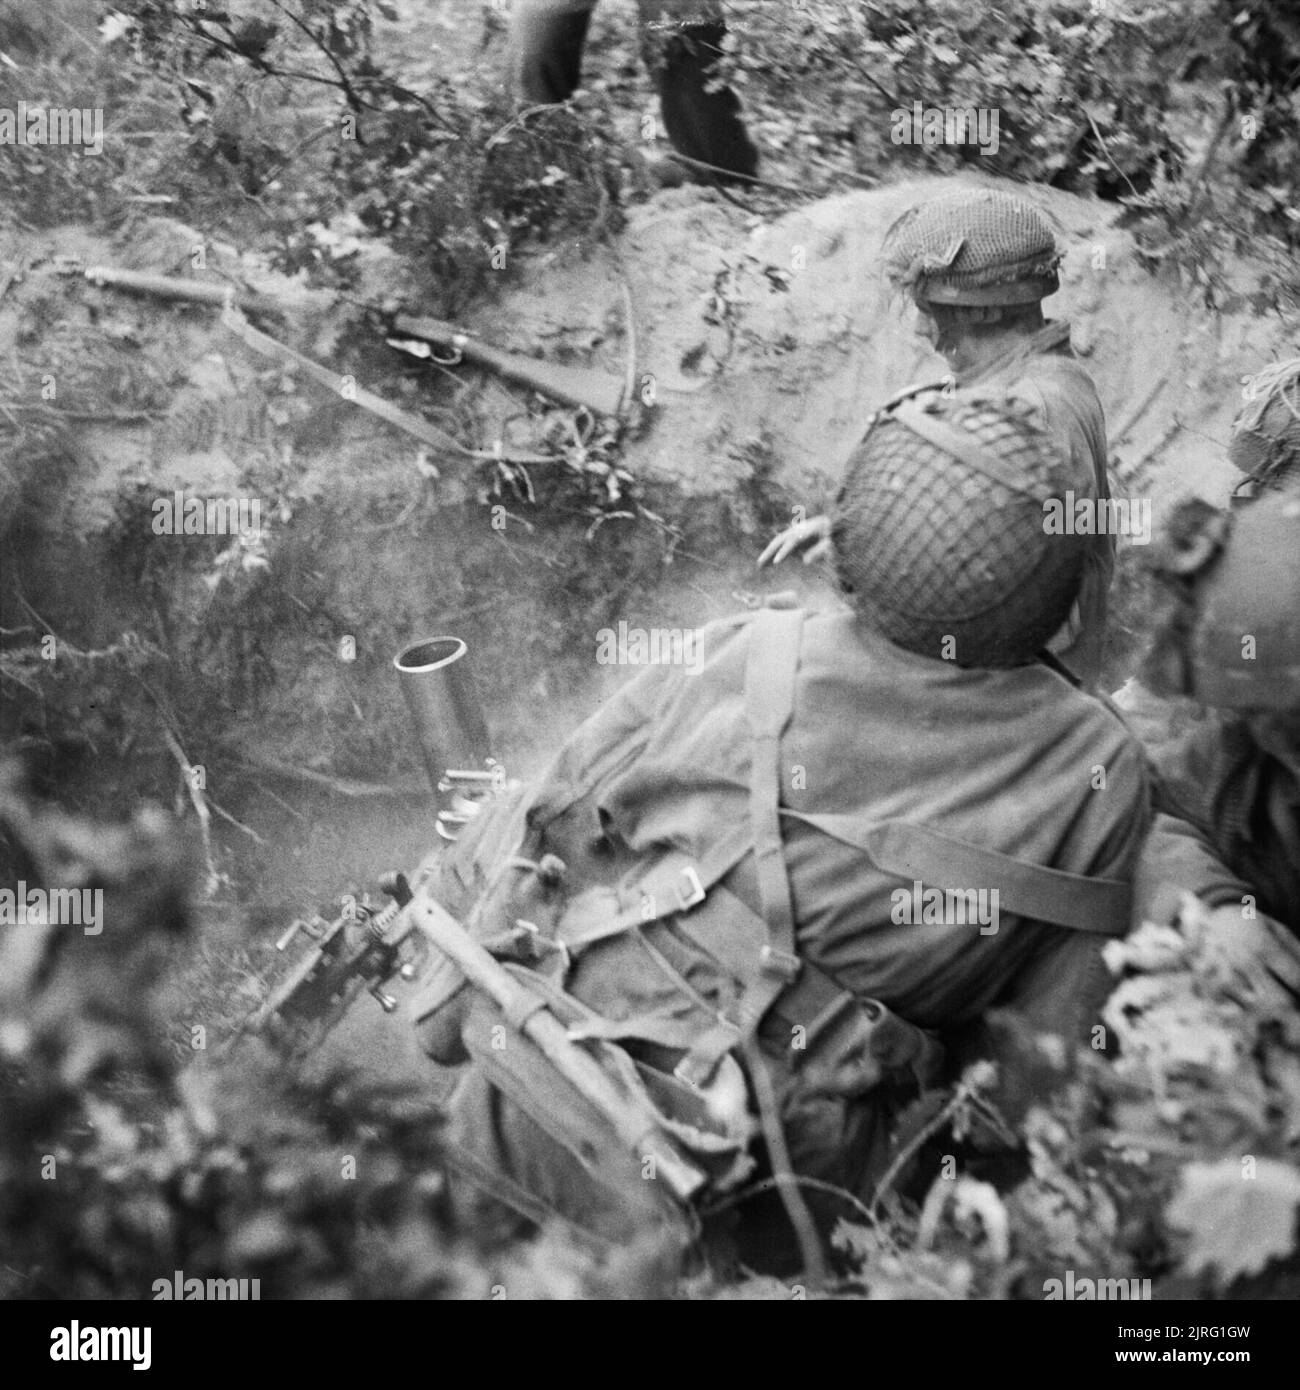 The Campaign in North West Europe 1944-45 3-inch mortar team of No.23 Mortar (Handcarts) Platoon of Support Company, 1st Border Regiment, 1st Airborne Division, in action in the Oosterbeek perimeter at Arnhem, 21 September 1944. Stock Photo